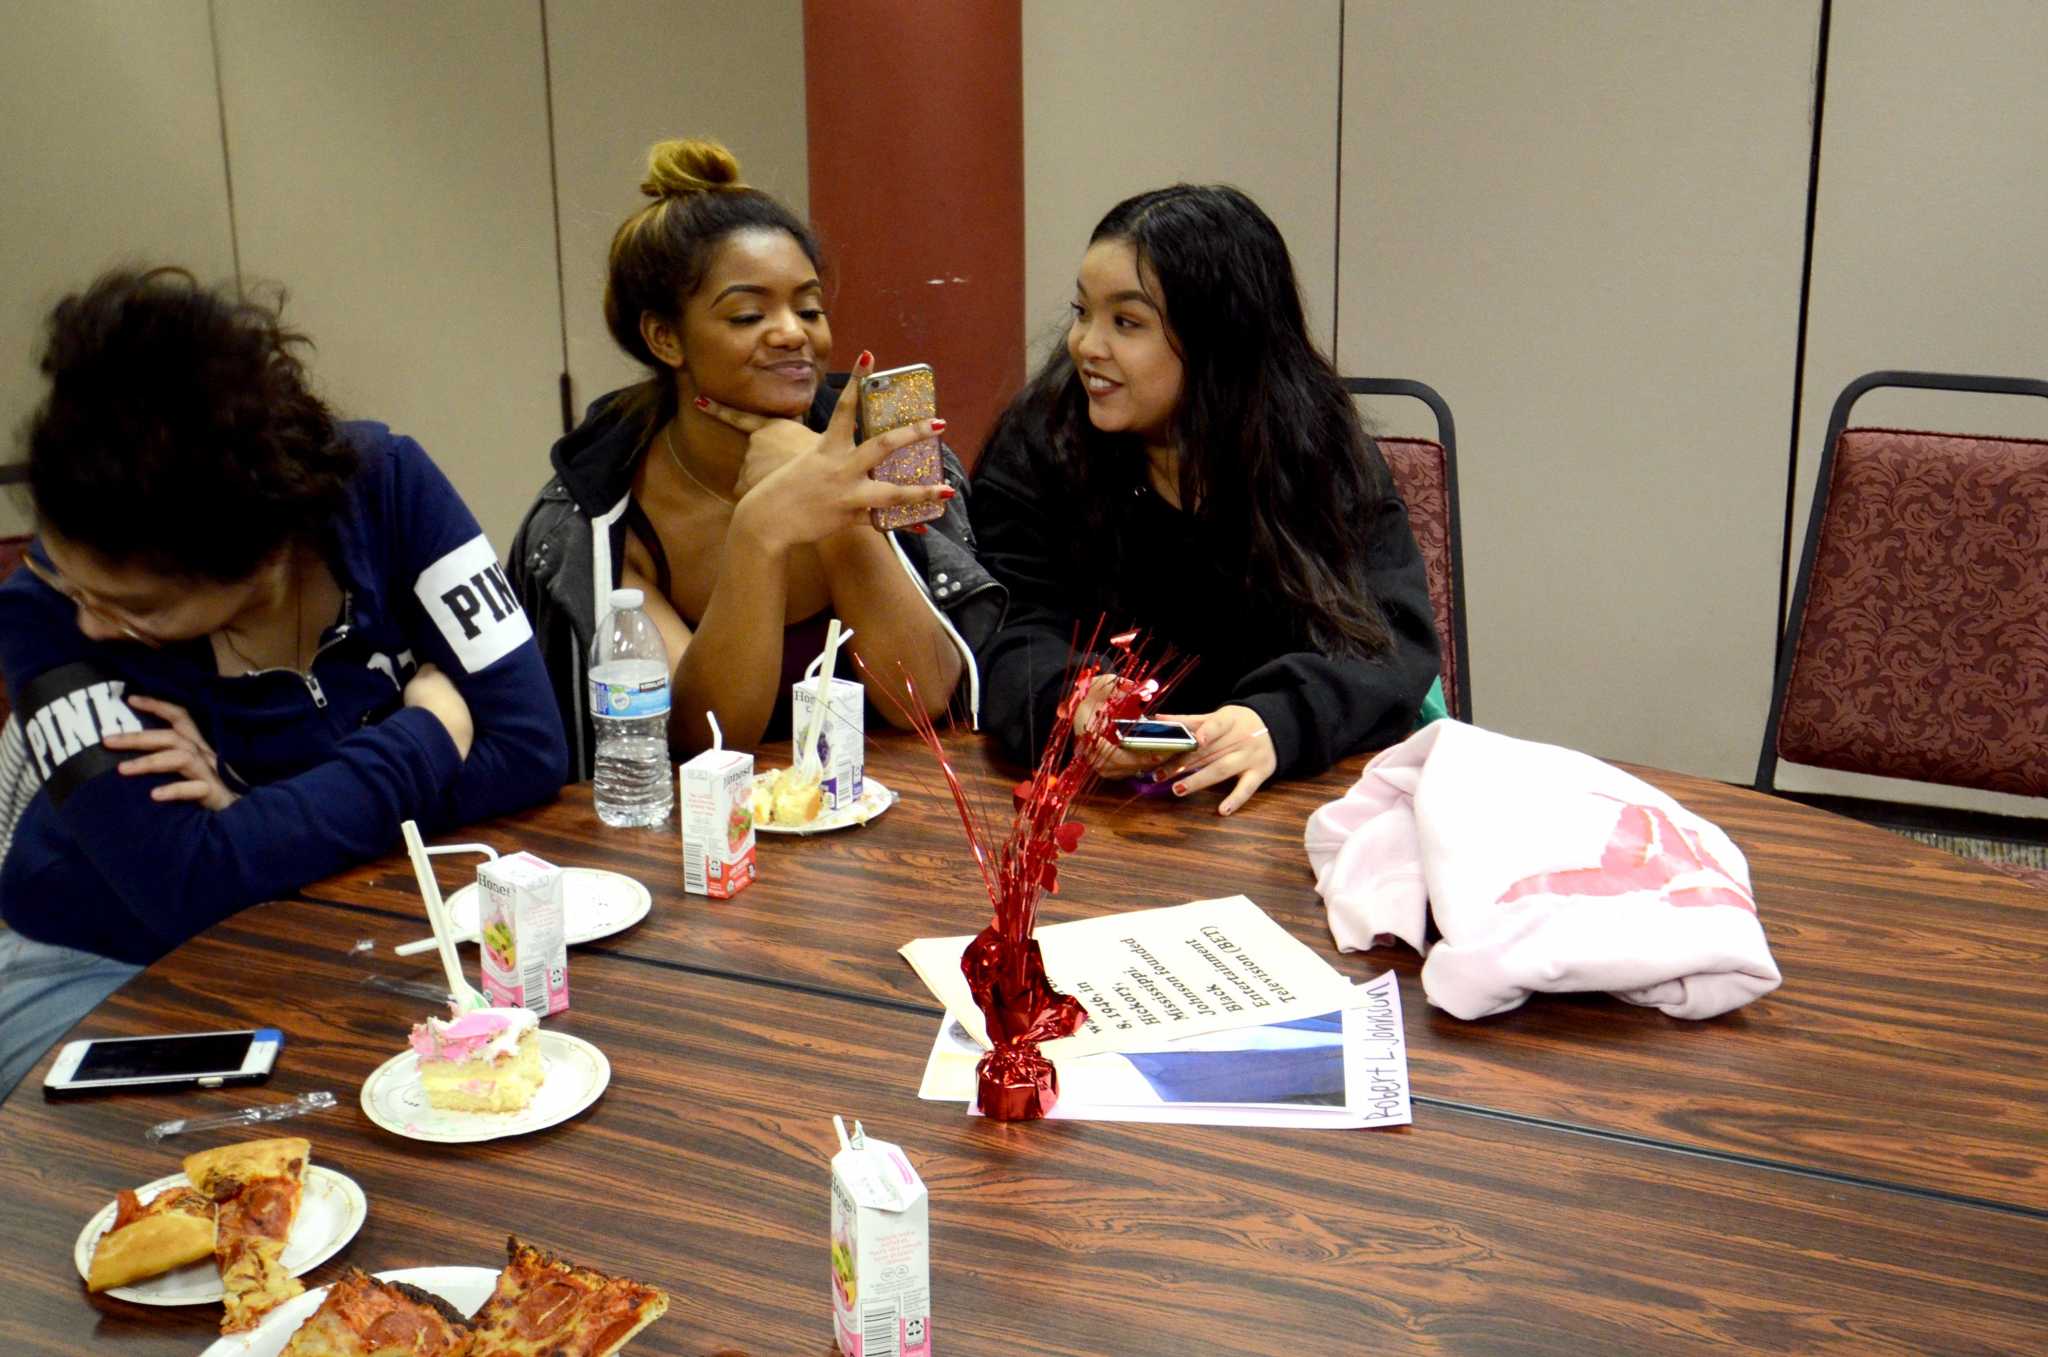 SF State students chat with friends at the Black History Month celebration held in the campuss Towers at Centennial Square on February 13, 2017. (Tate Drucker/Xpress)